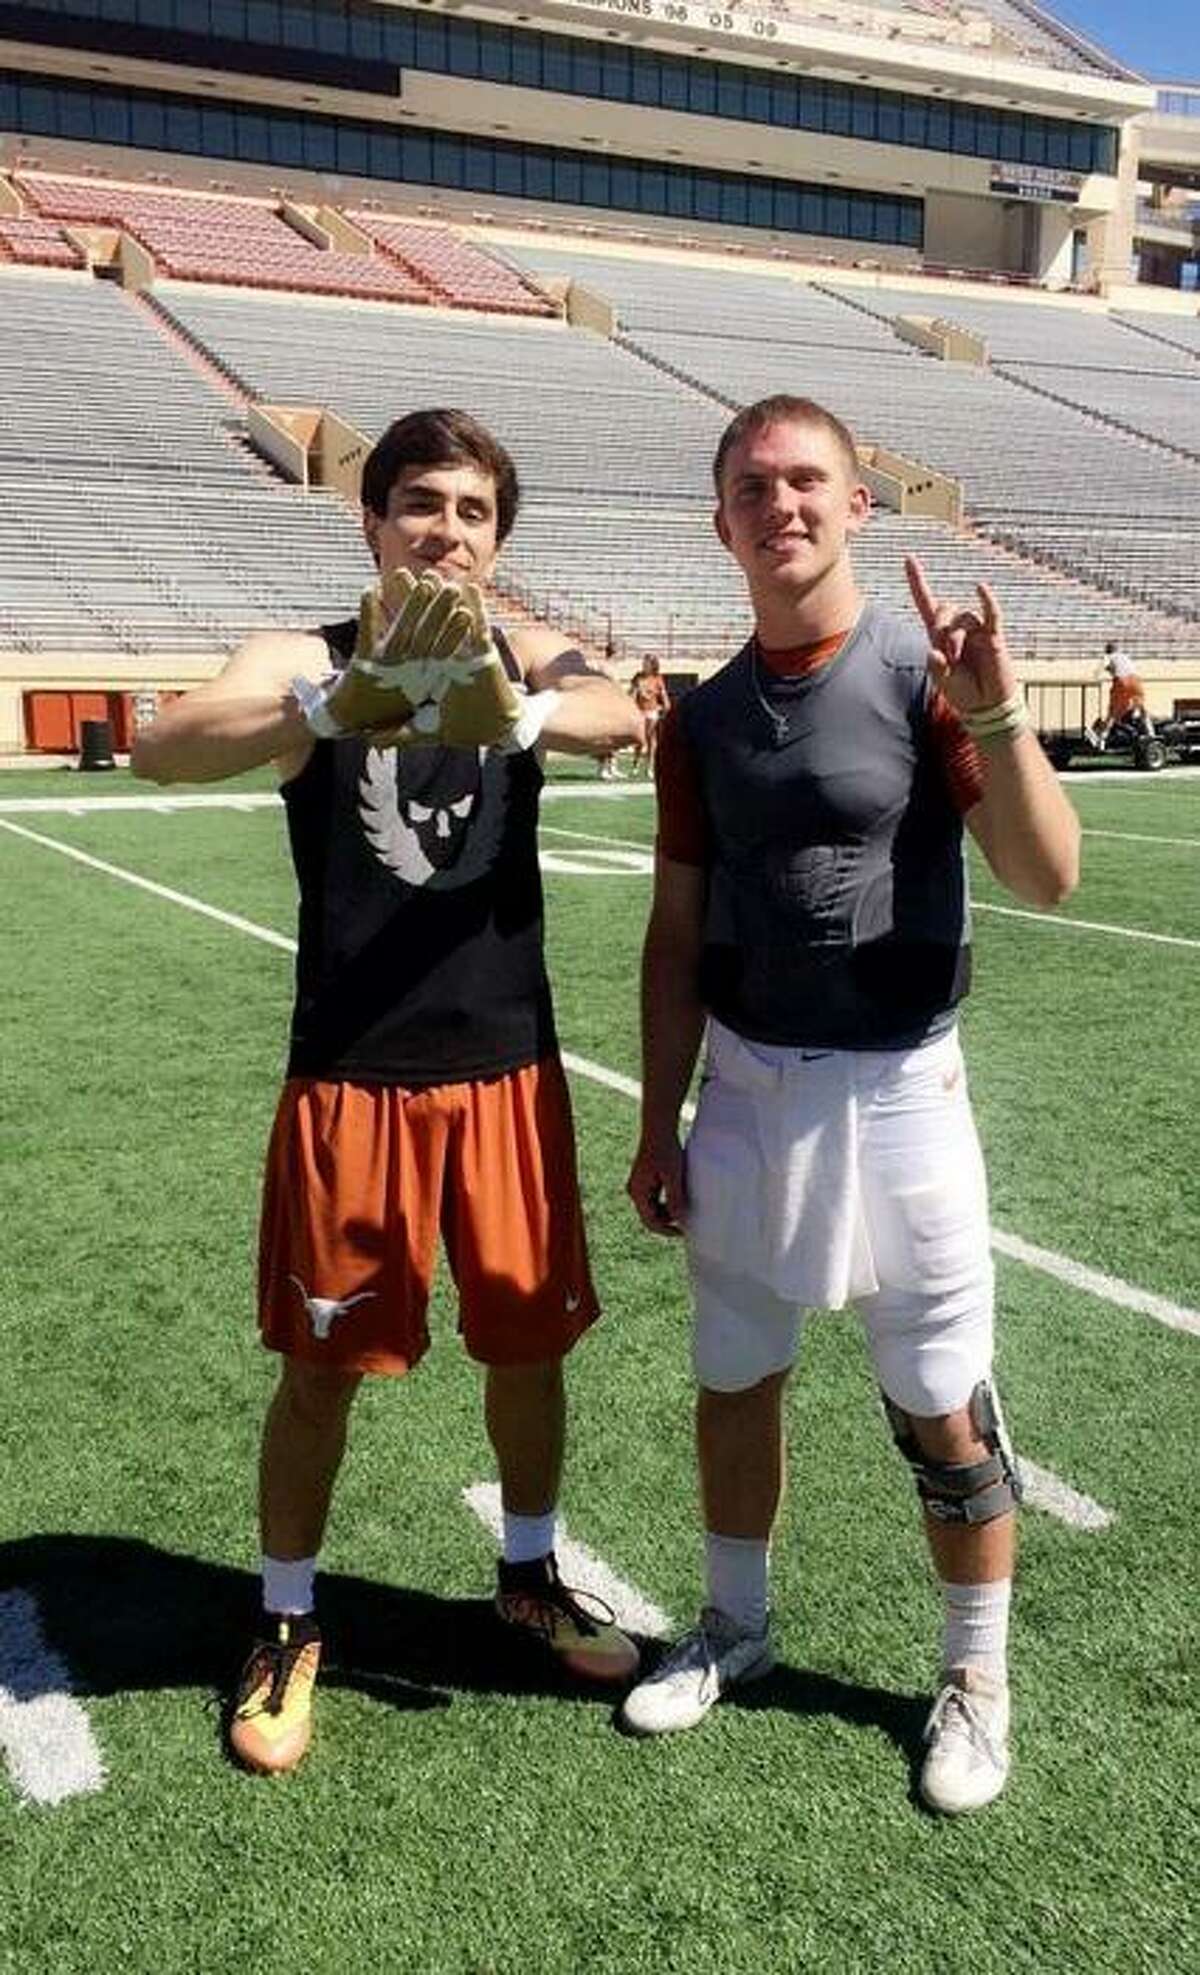 Justyn Betancourt, left, is pictured with Texas quarterback Shane Buechele at the Orange and White spring game. Betancourt could be catching passes from Buechele in the fall as he prepares to try out for the Longhorns at wide receiver.